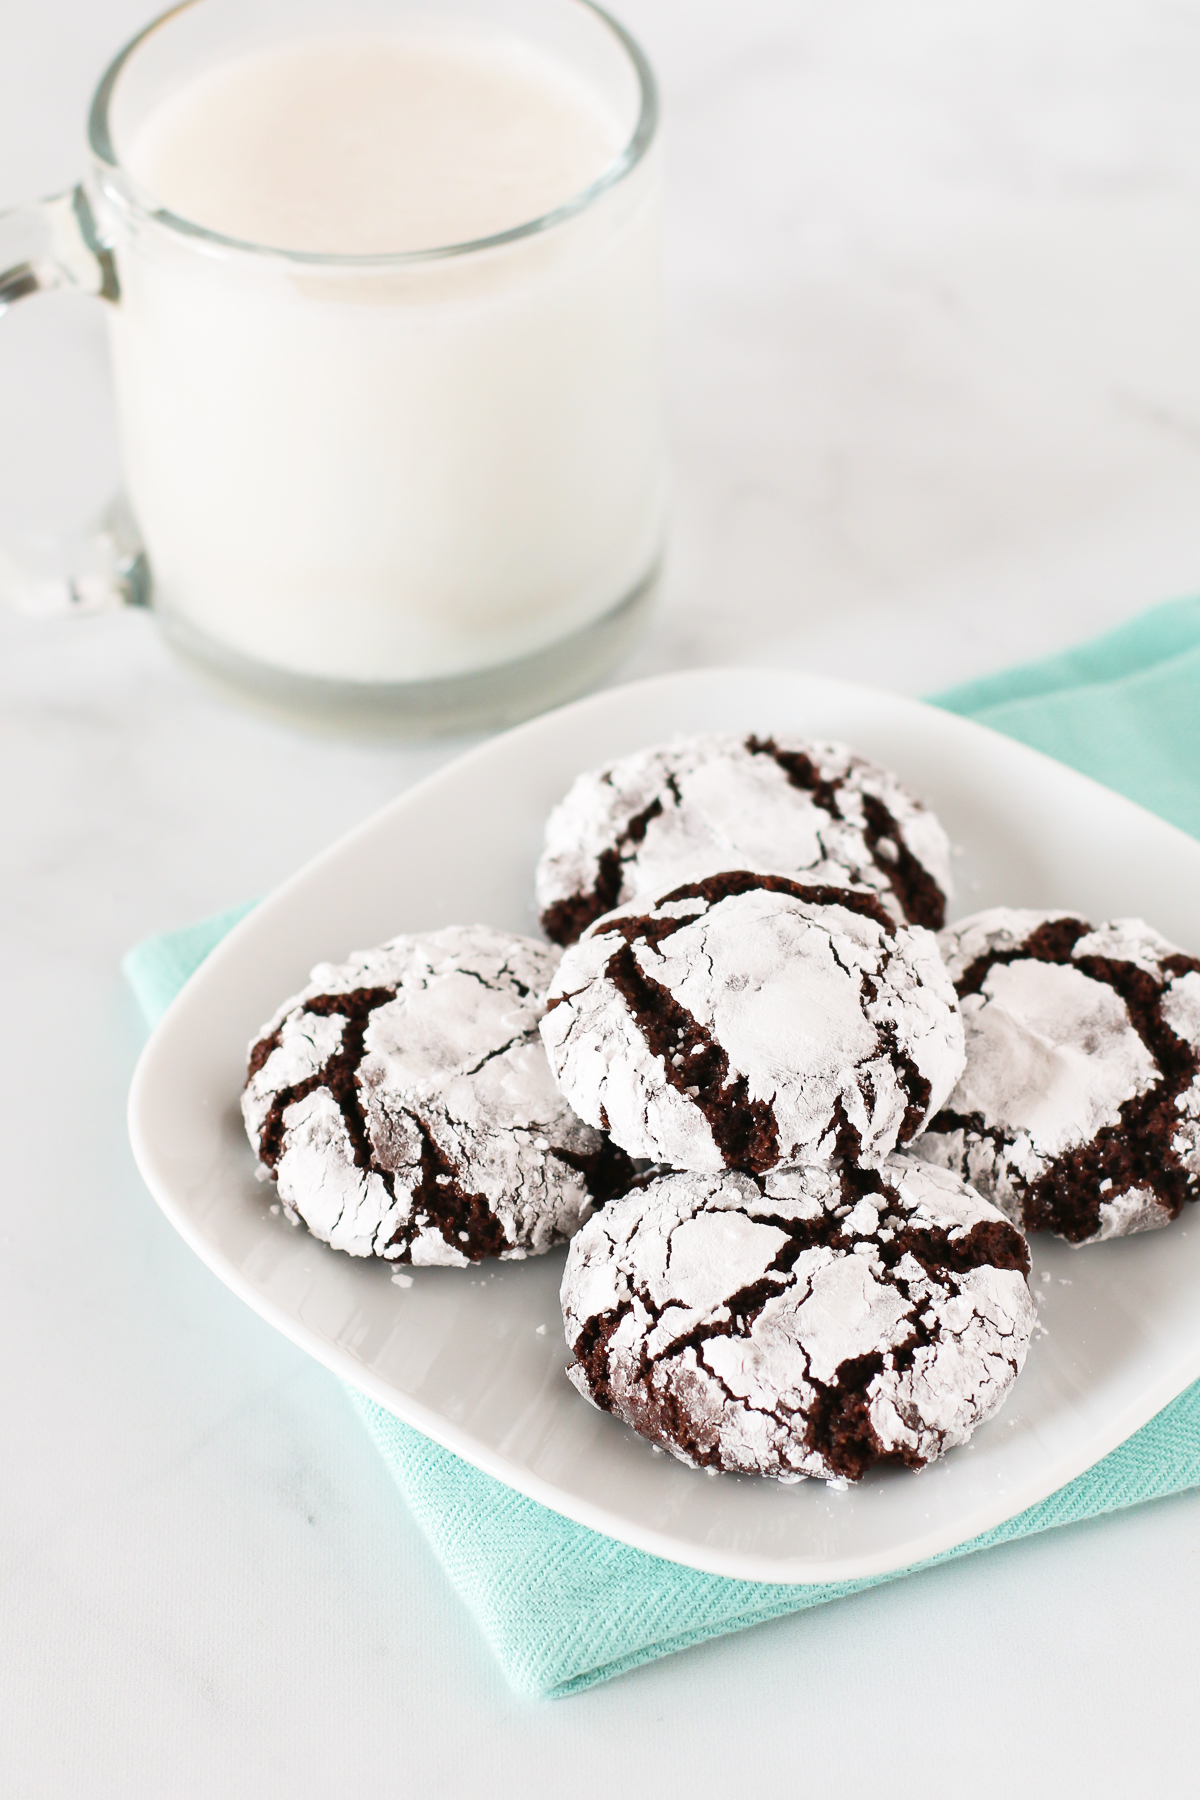 Gluten Free Vegan Chocolate Crinkle Cookies. The classic chewy chocolate cookie, coated in powdered sugar and completely irresistible. 